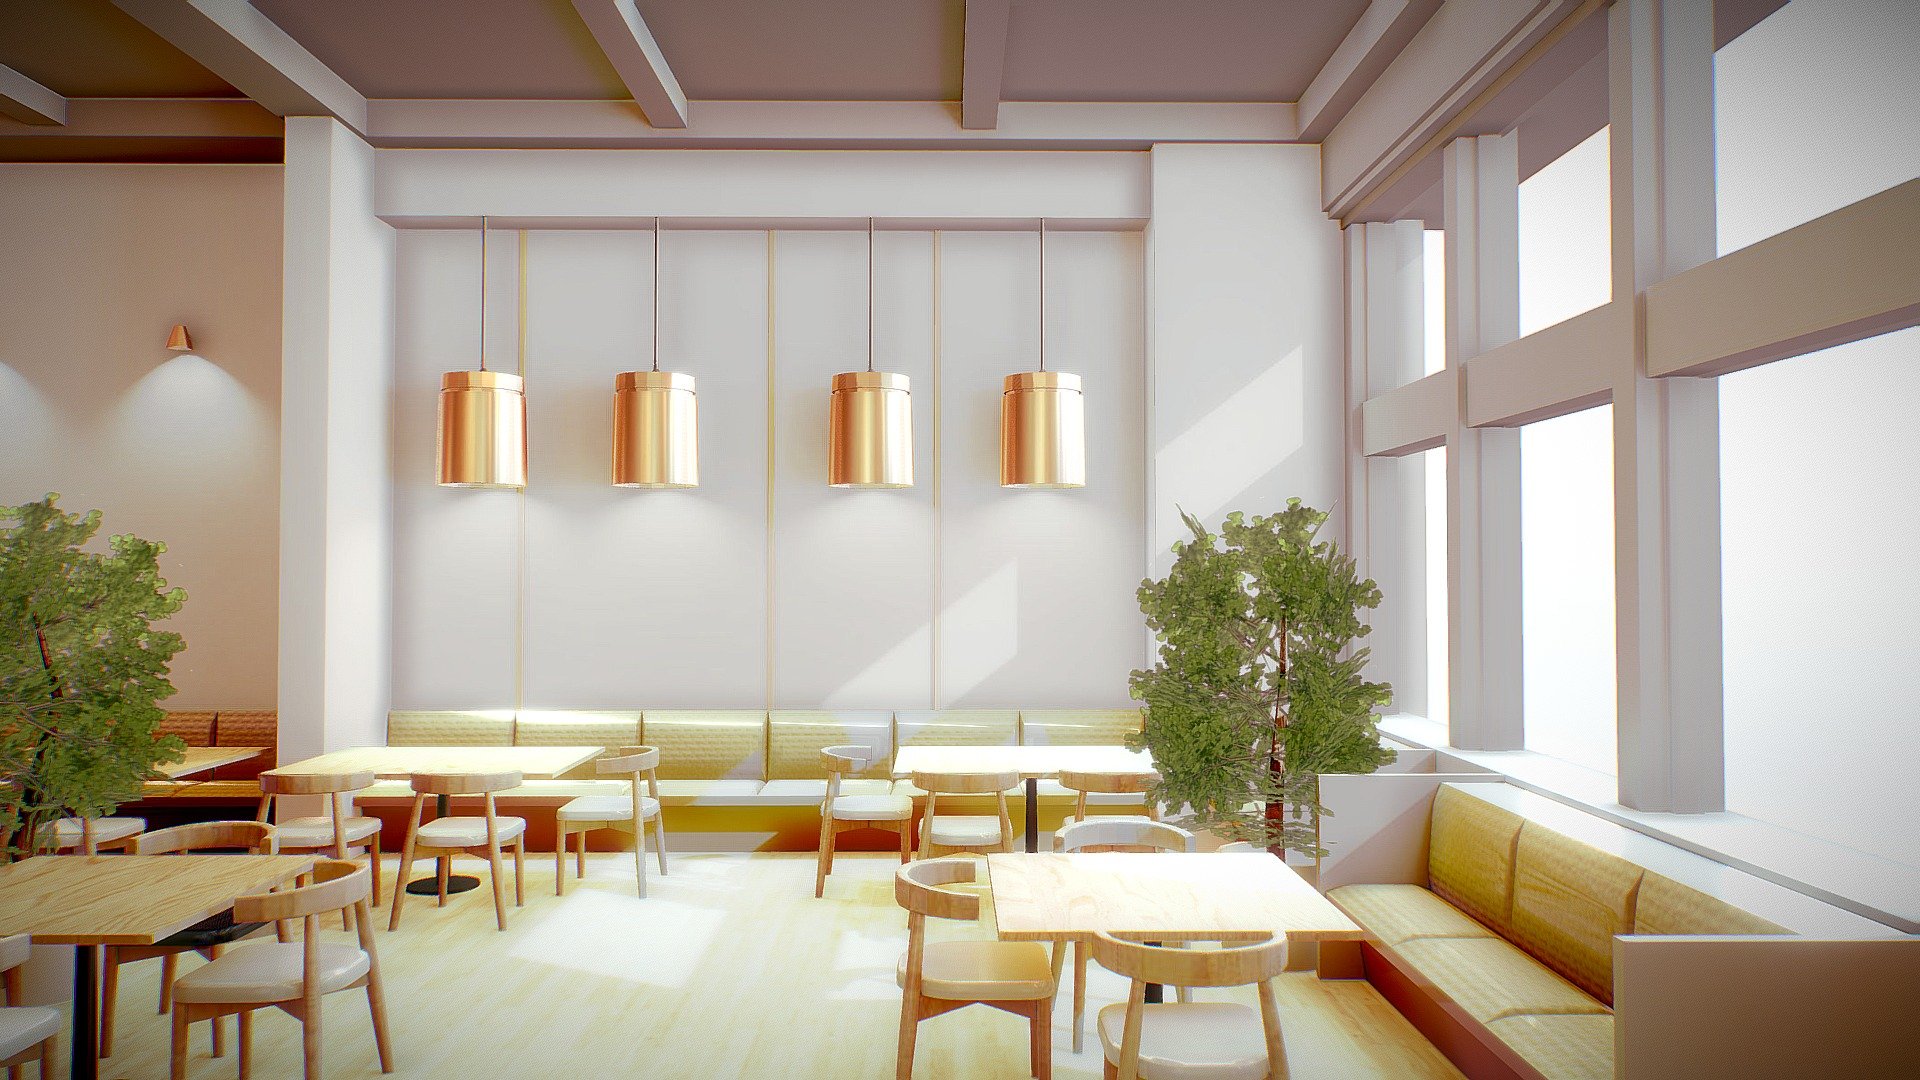 Lowpoly VR ready Restaurant Scene. It is good for any gaming project you may have in mind. Let me know if you have any questions! - VR Modern Restaurant Scene - E9 - Buy Royalty Free 3D model by lazae 3d model